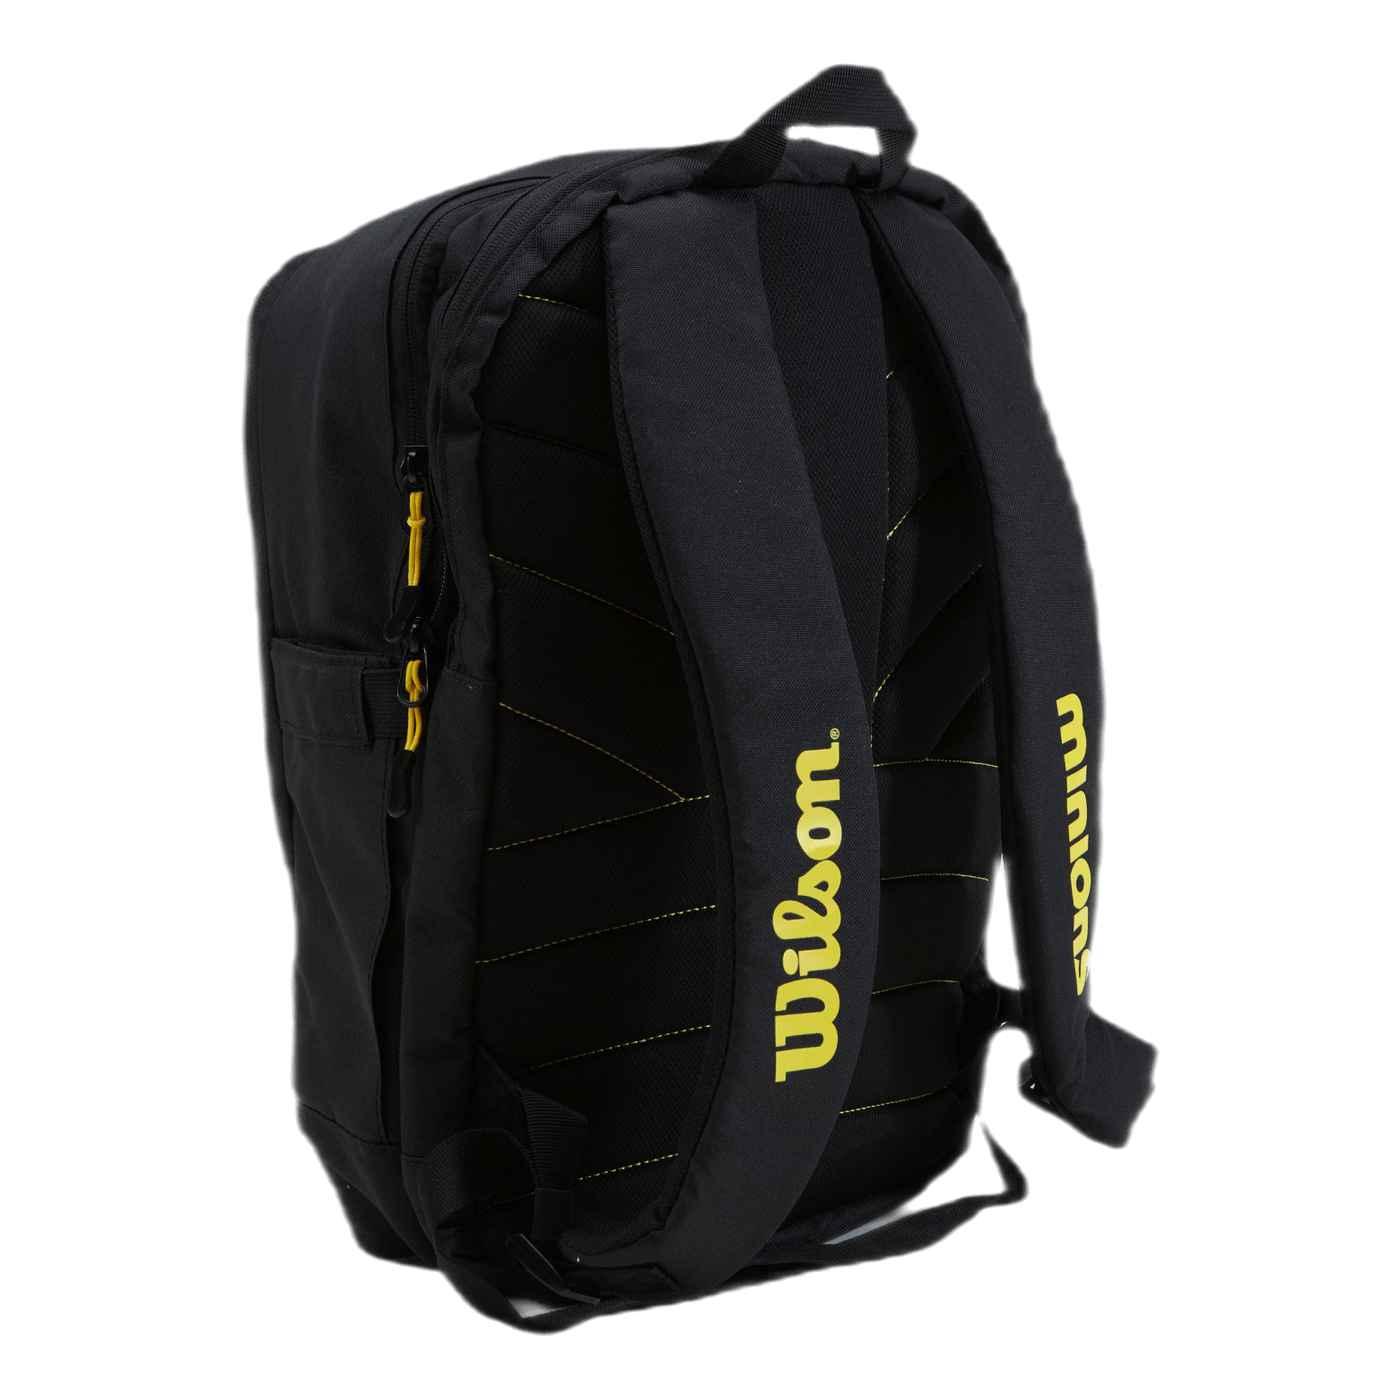 Minions Tour Backpack Black/Yellow